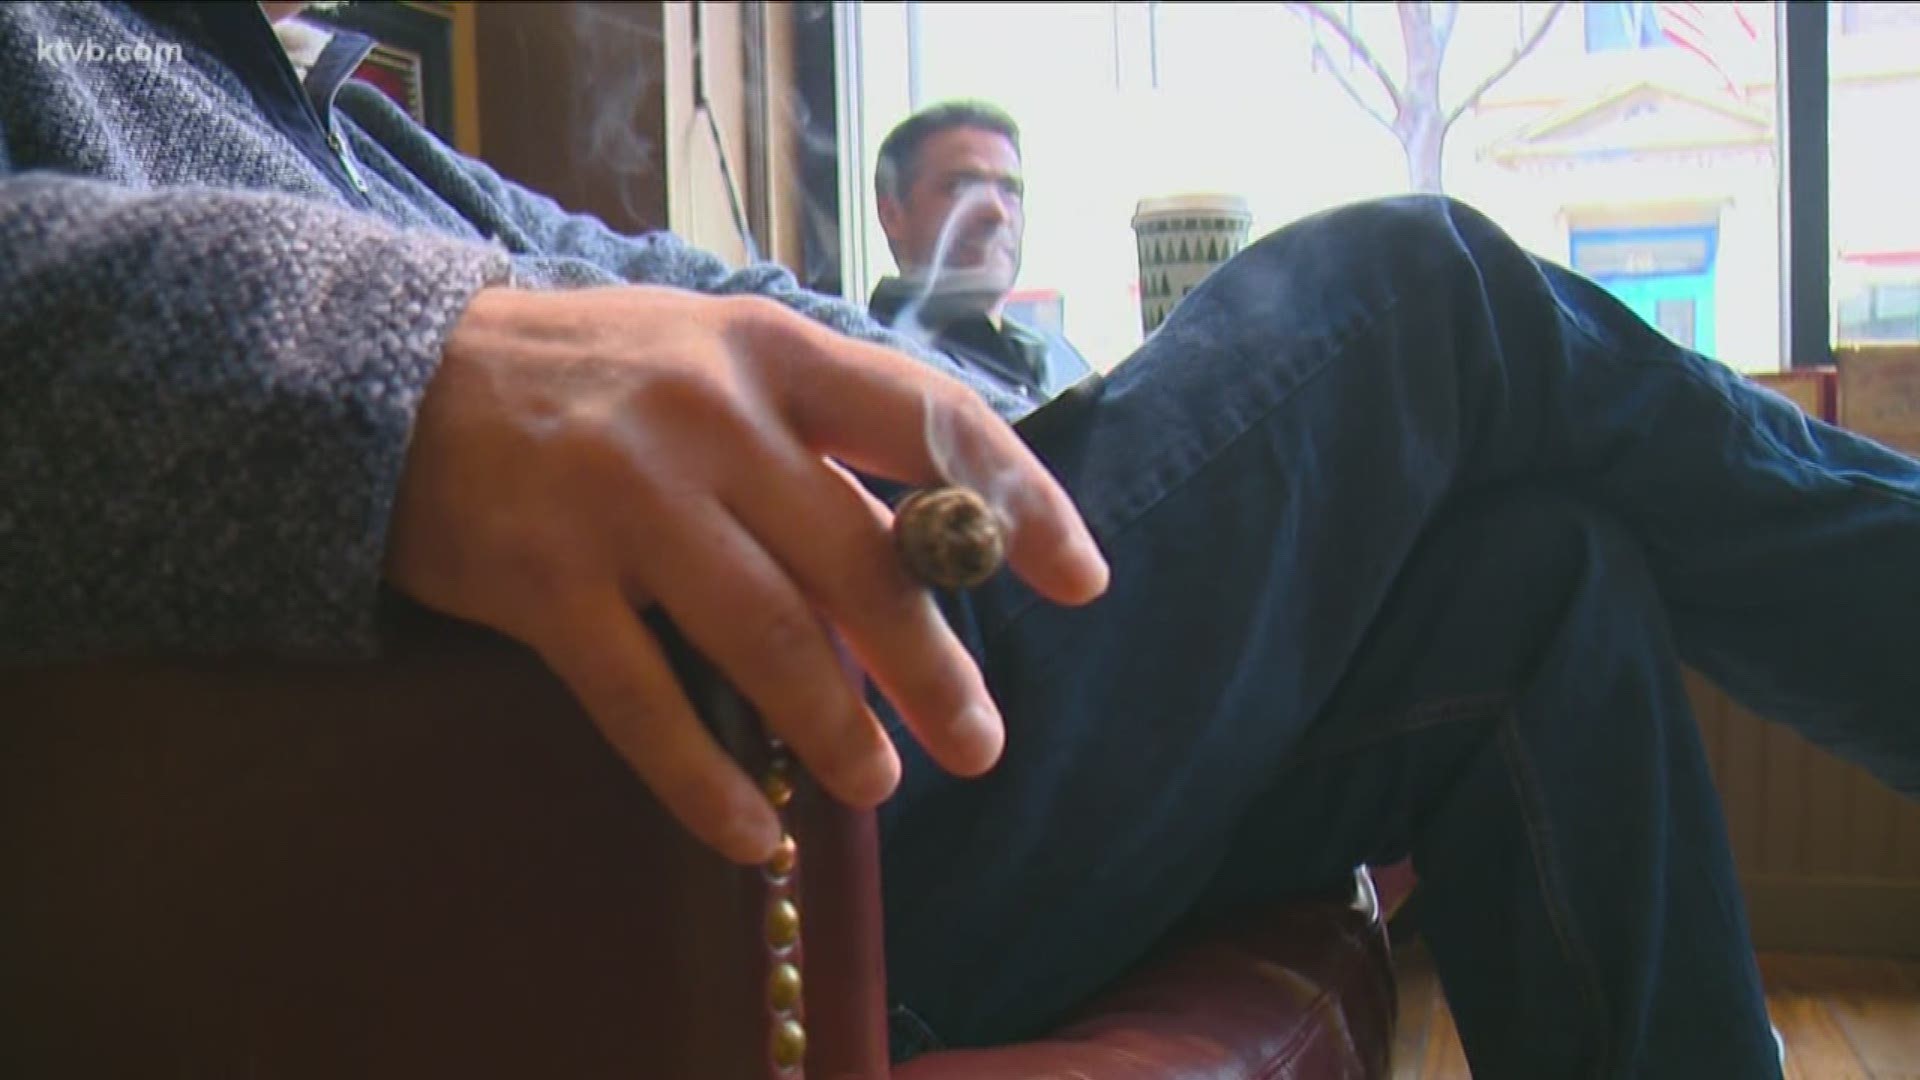 On Friday, the FDA announced that they will raise the age for buying tobacco to 21. KTVB spoke to one local business on what this means for them.